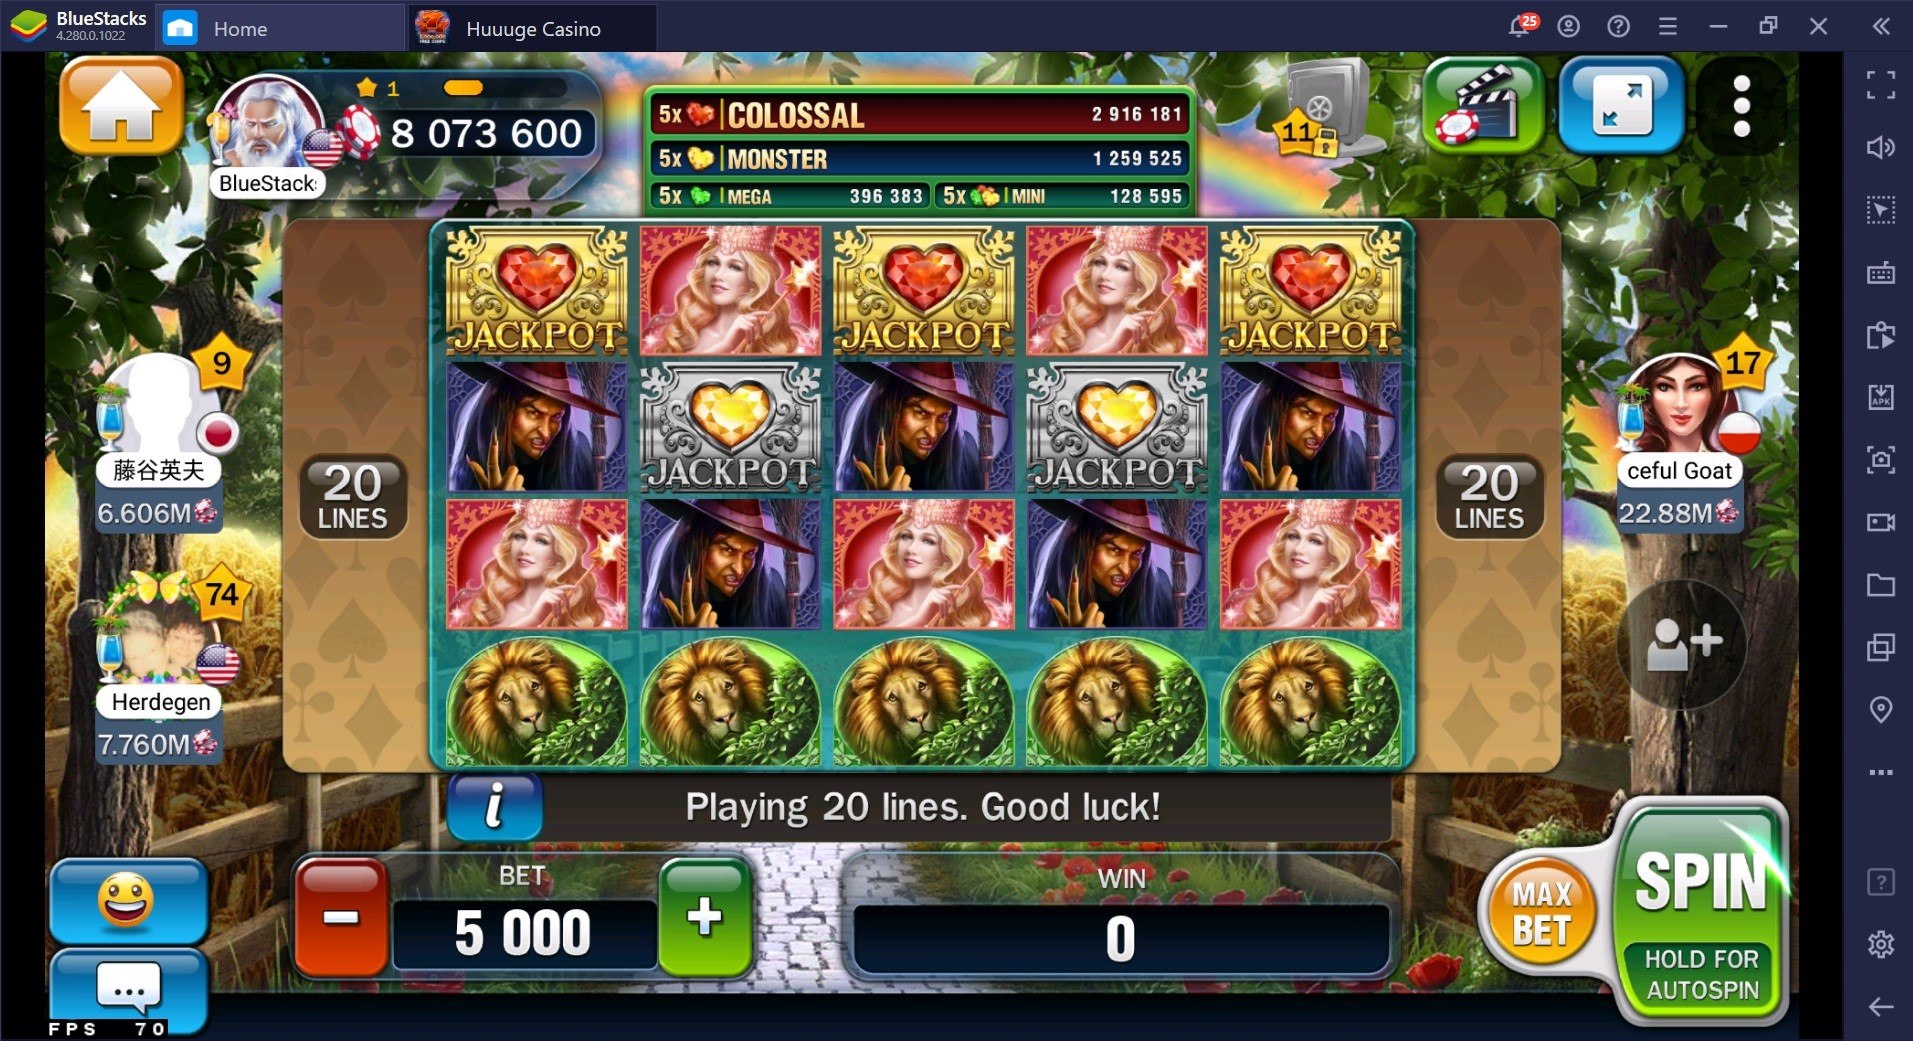 How to play Huuuge Casino Slots on PC with BlueStacks